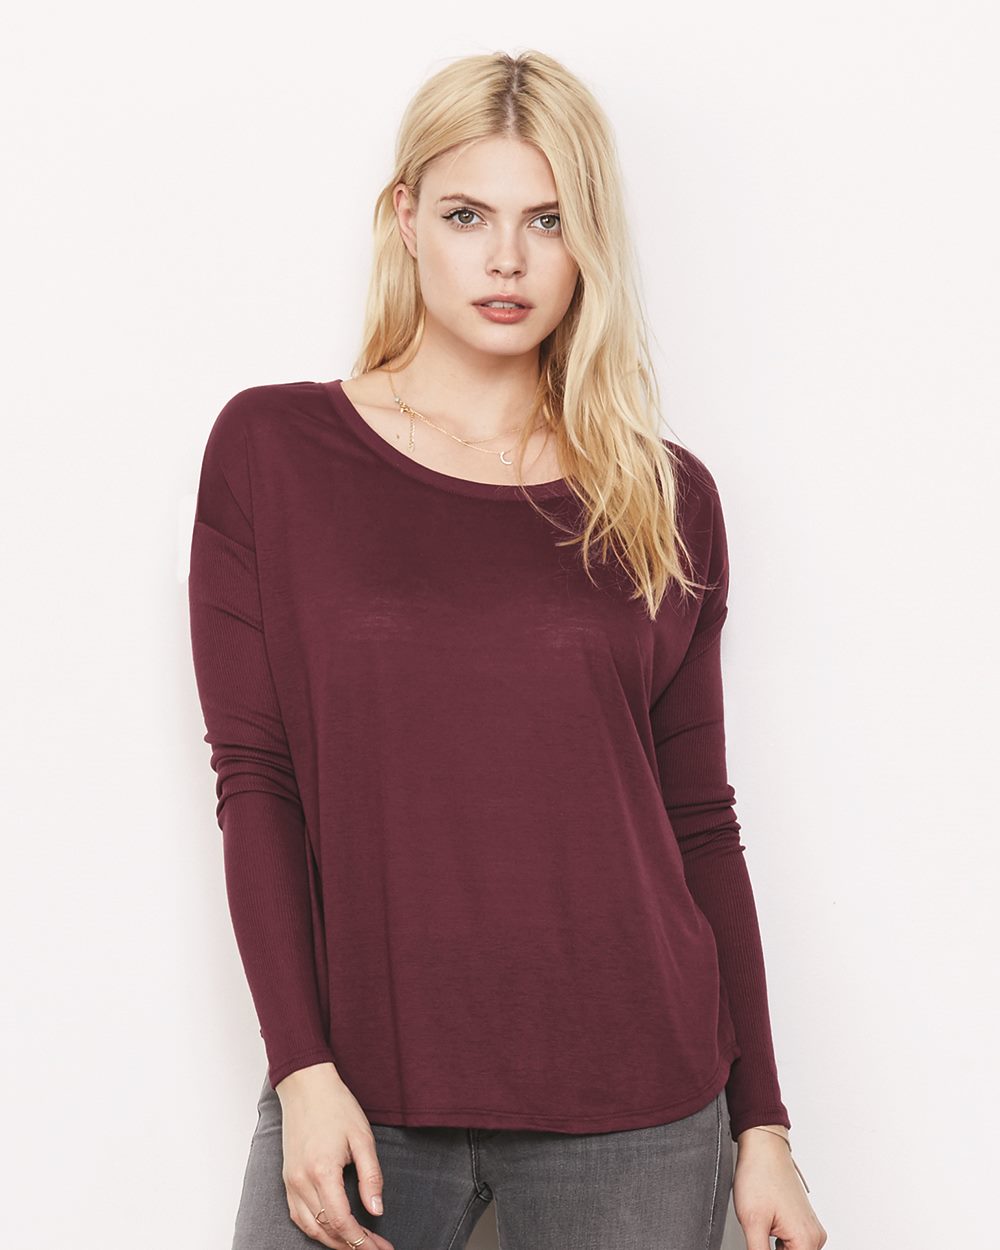 Bella + Canvas 8852 - Women's Flowy Long Sleeve Tee with 2x1 Sleeves ...